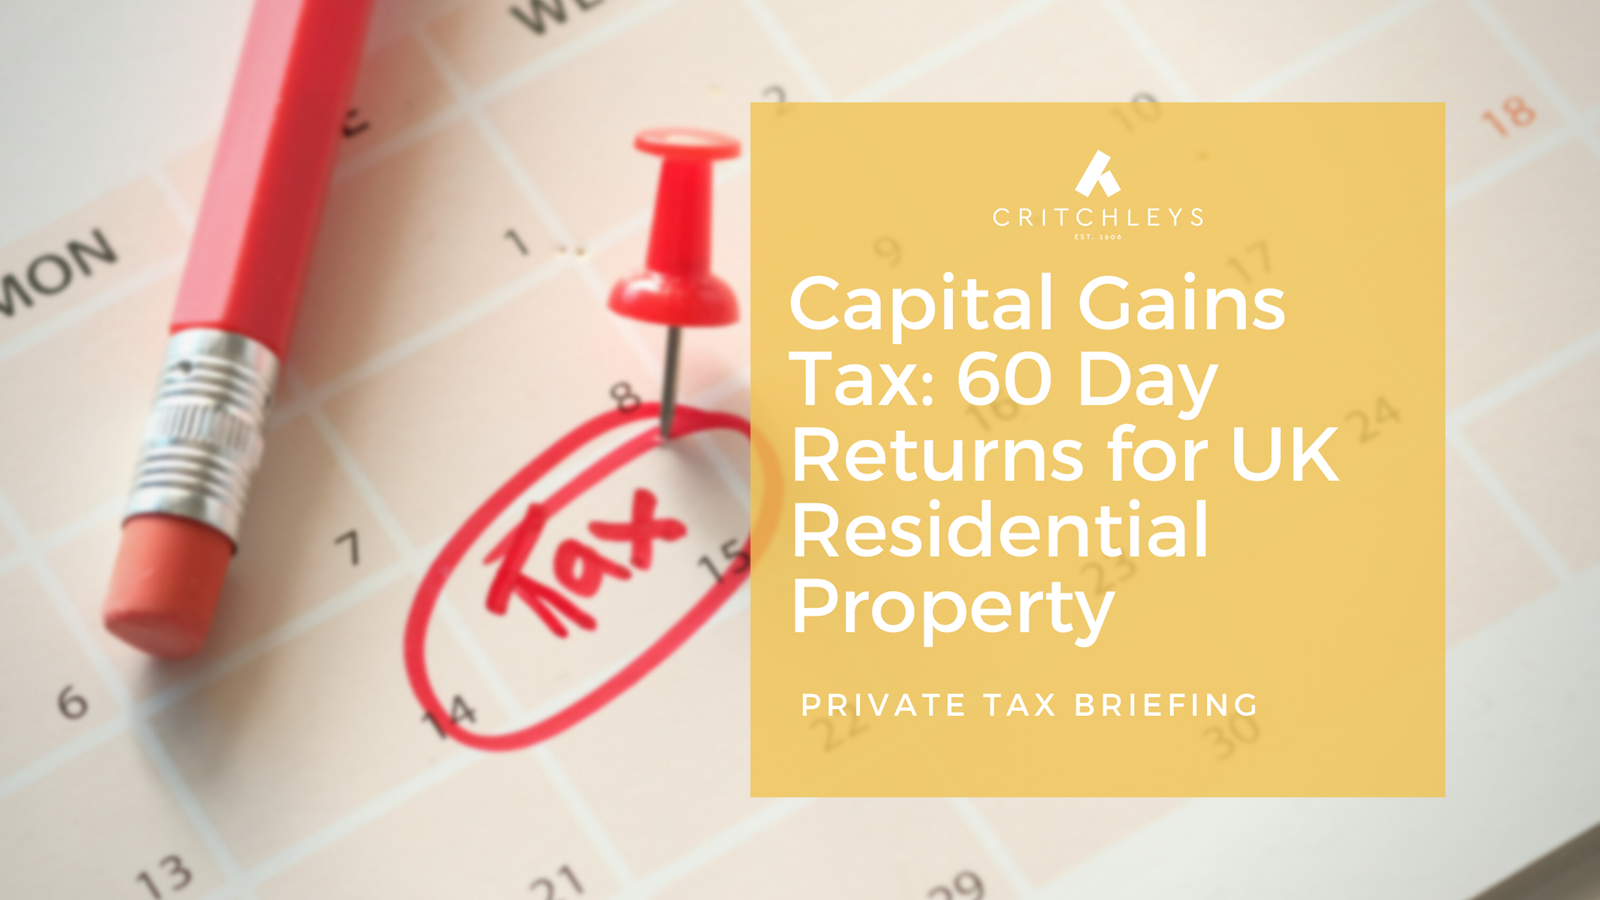 Capital Gains Tax: 60 Day Returns for UK Residential Property